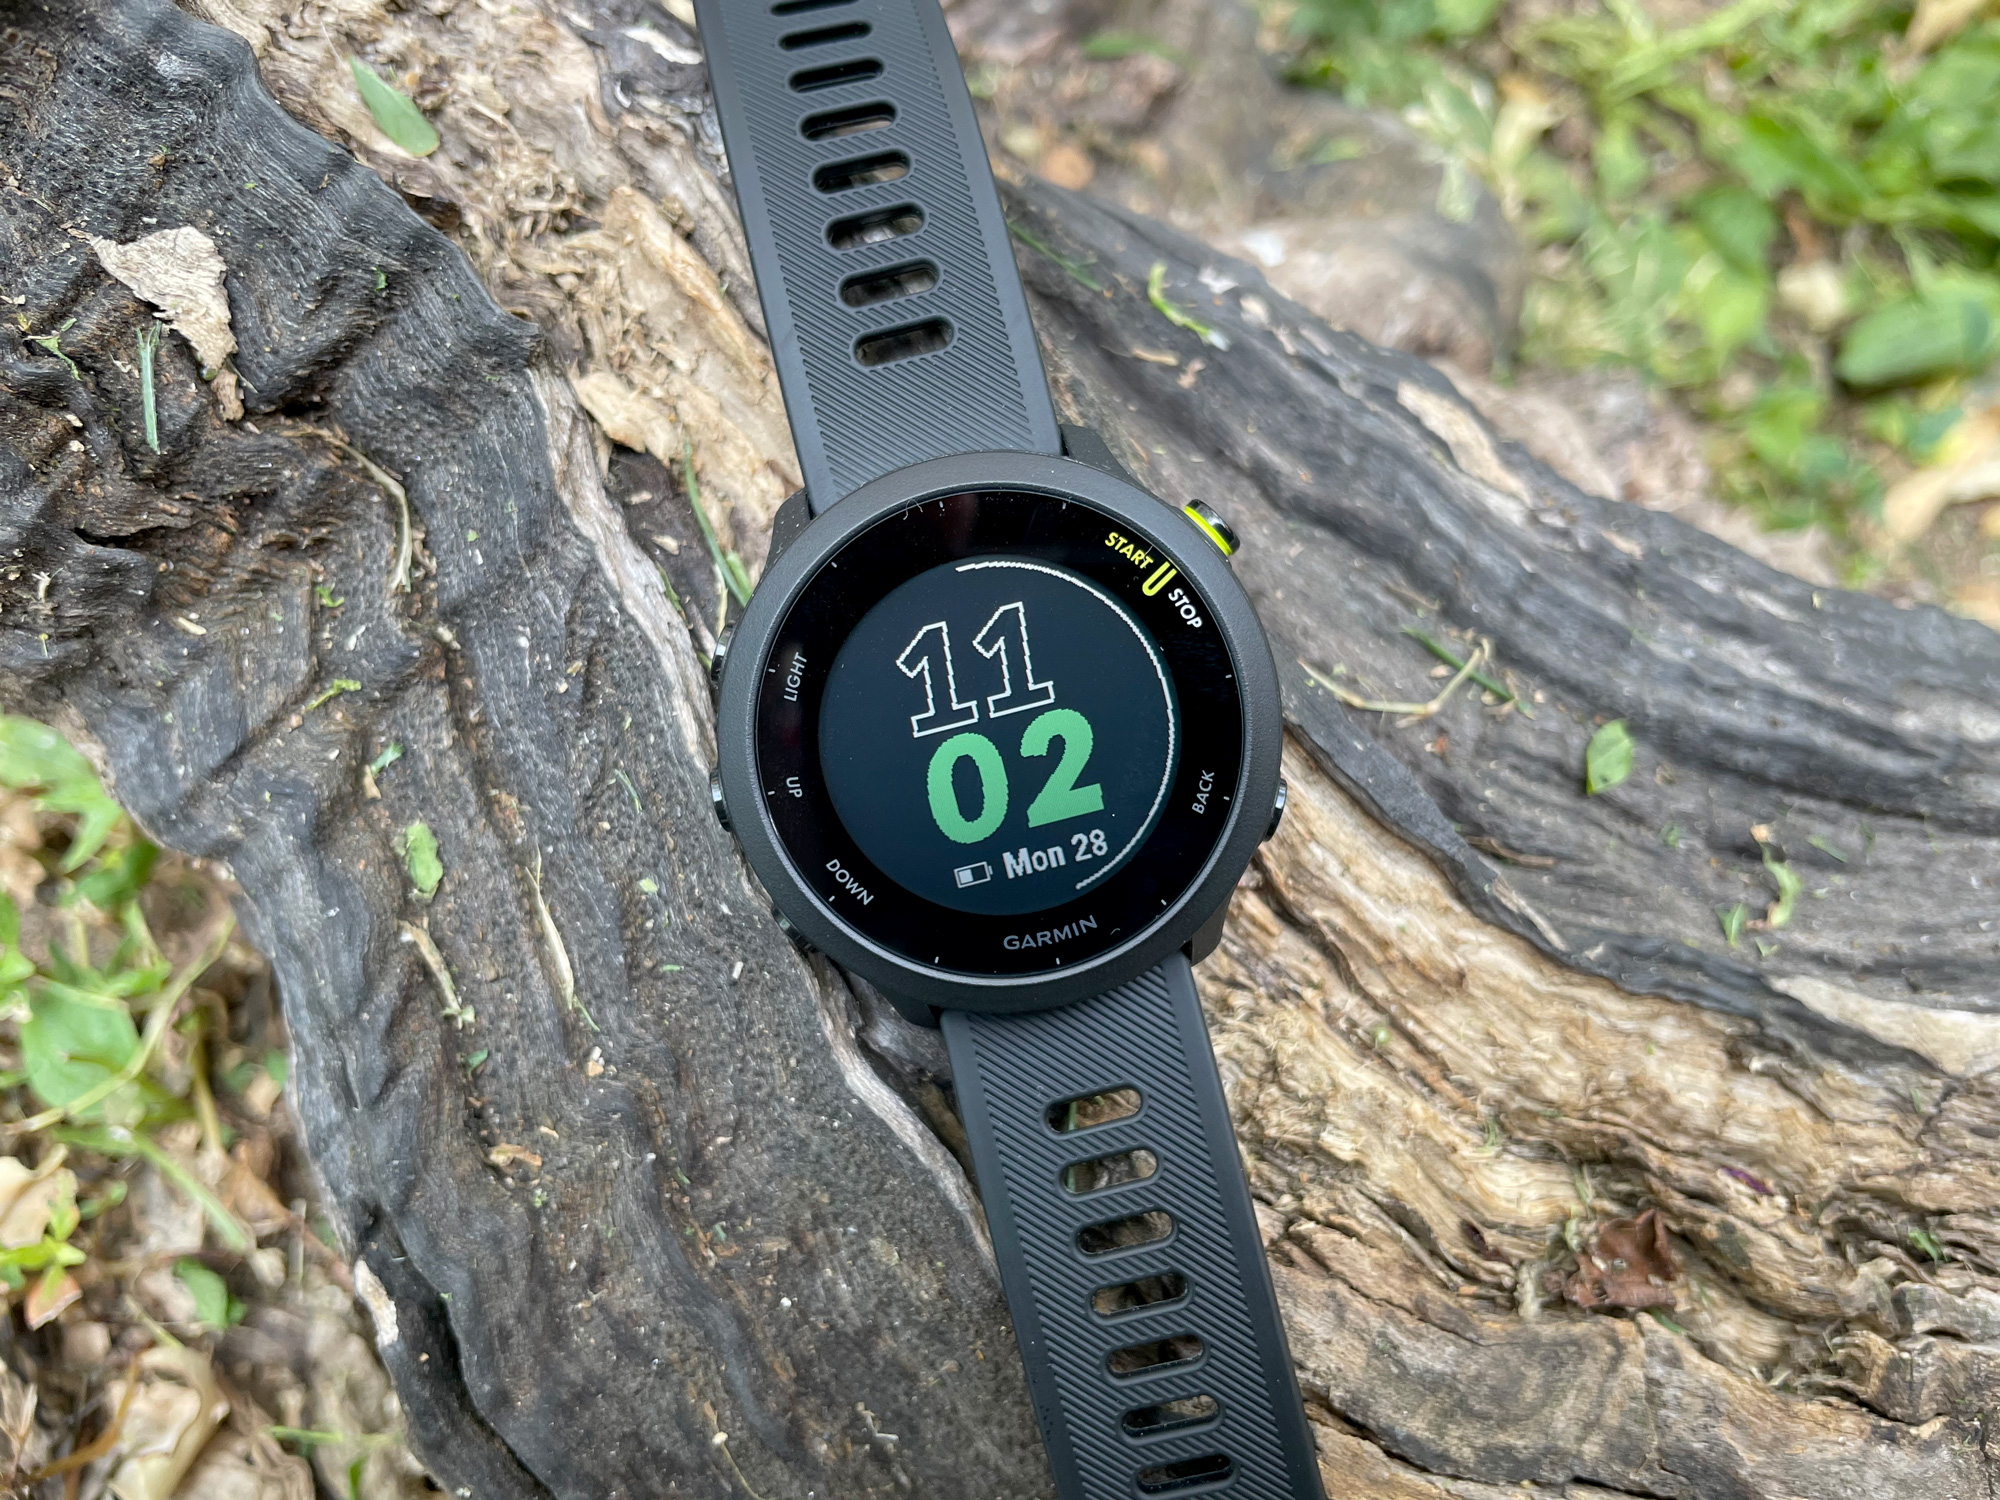 New to Garmin! Just got my Forerunner 55. Any tips, suggestions or